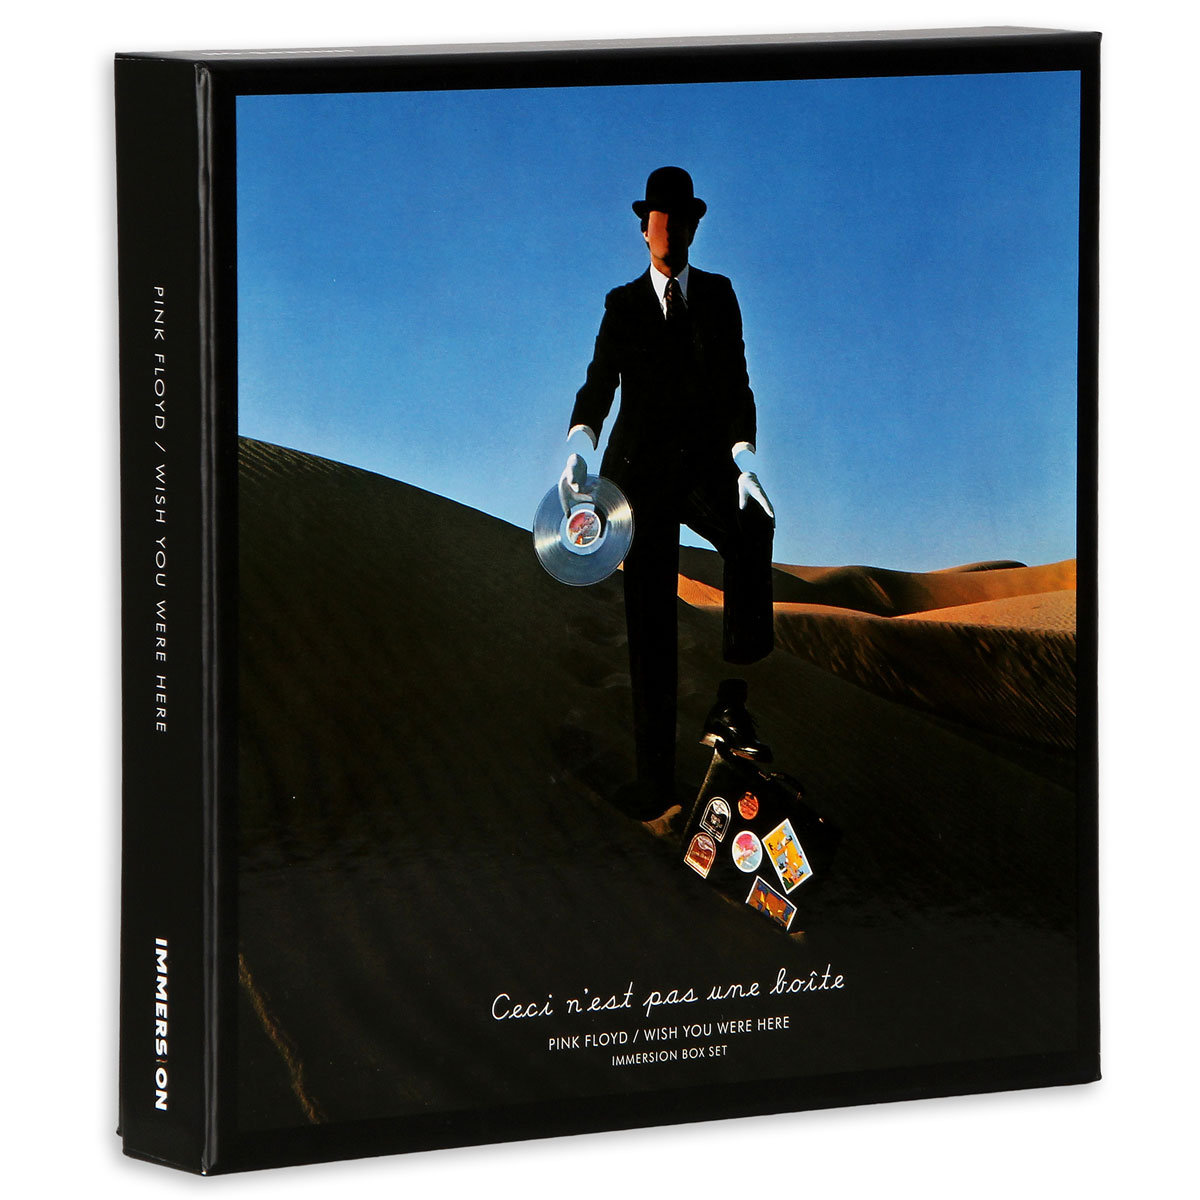 Wish You Were Here - Immersion Boxset (Limited Edition CD Boxset